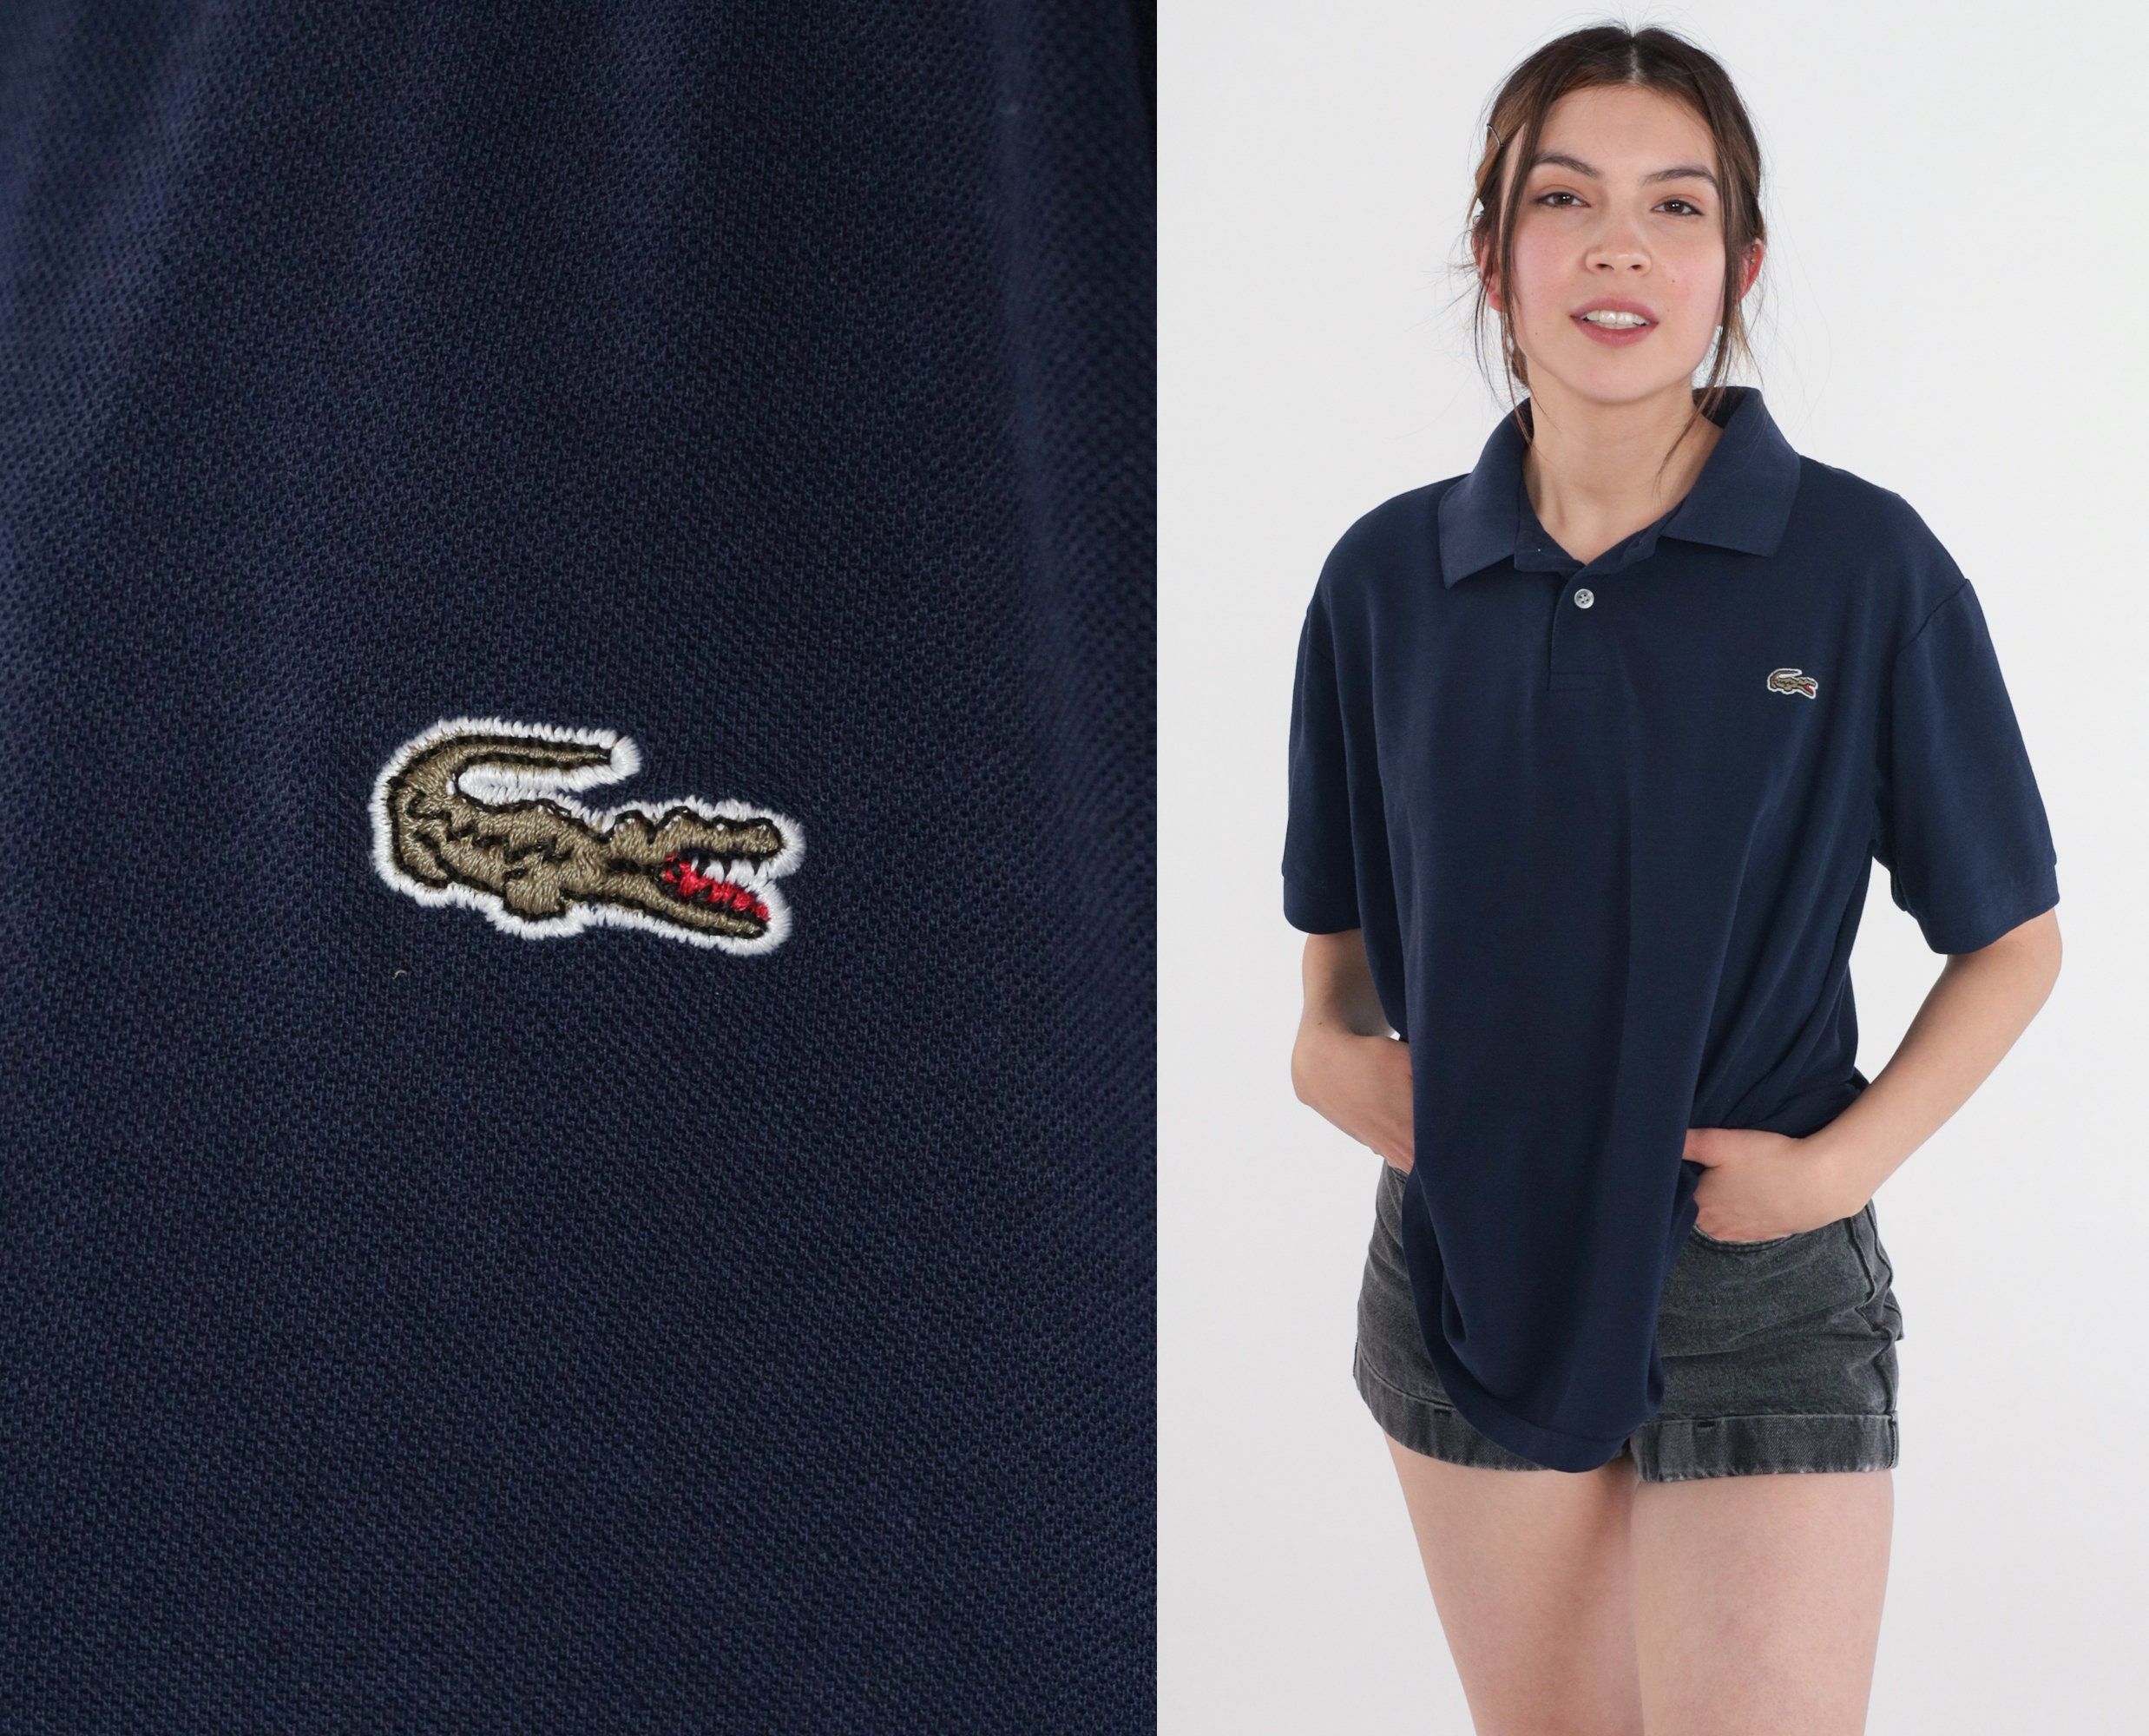 Navy Lacoste Polo Y2K Izod Collared Crocodile Short Sleeve Top Plain Preppy Button Up T-shirt Vintage 00s Extra Large xl